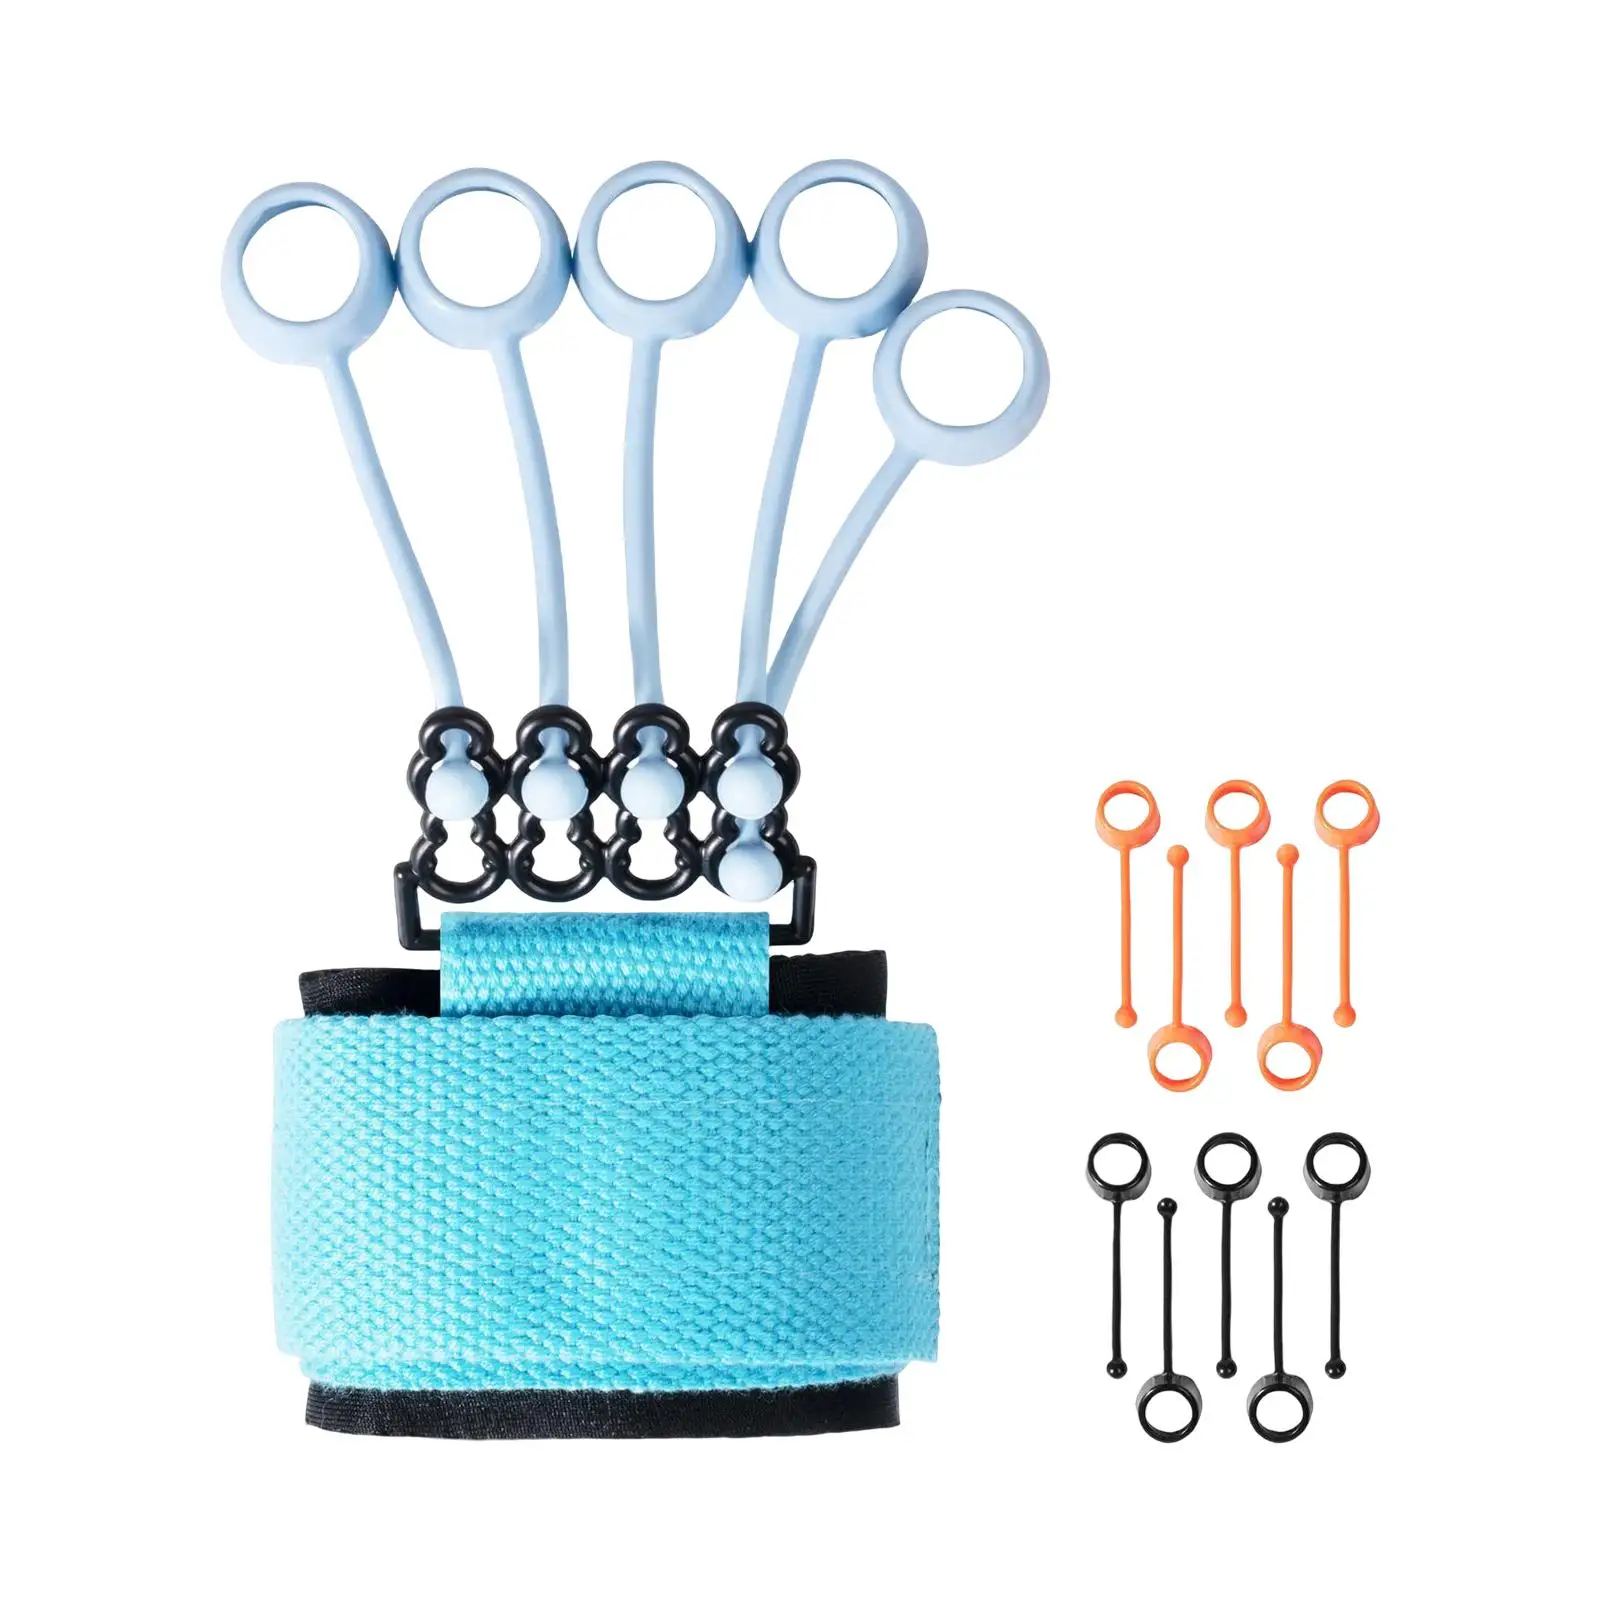 Grip Strengthener Finger Gripper Trainer for Bass Players Pianists